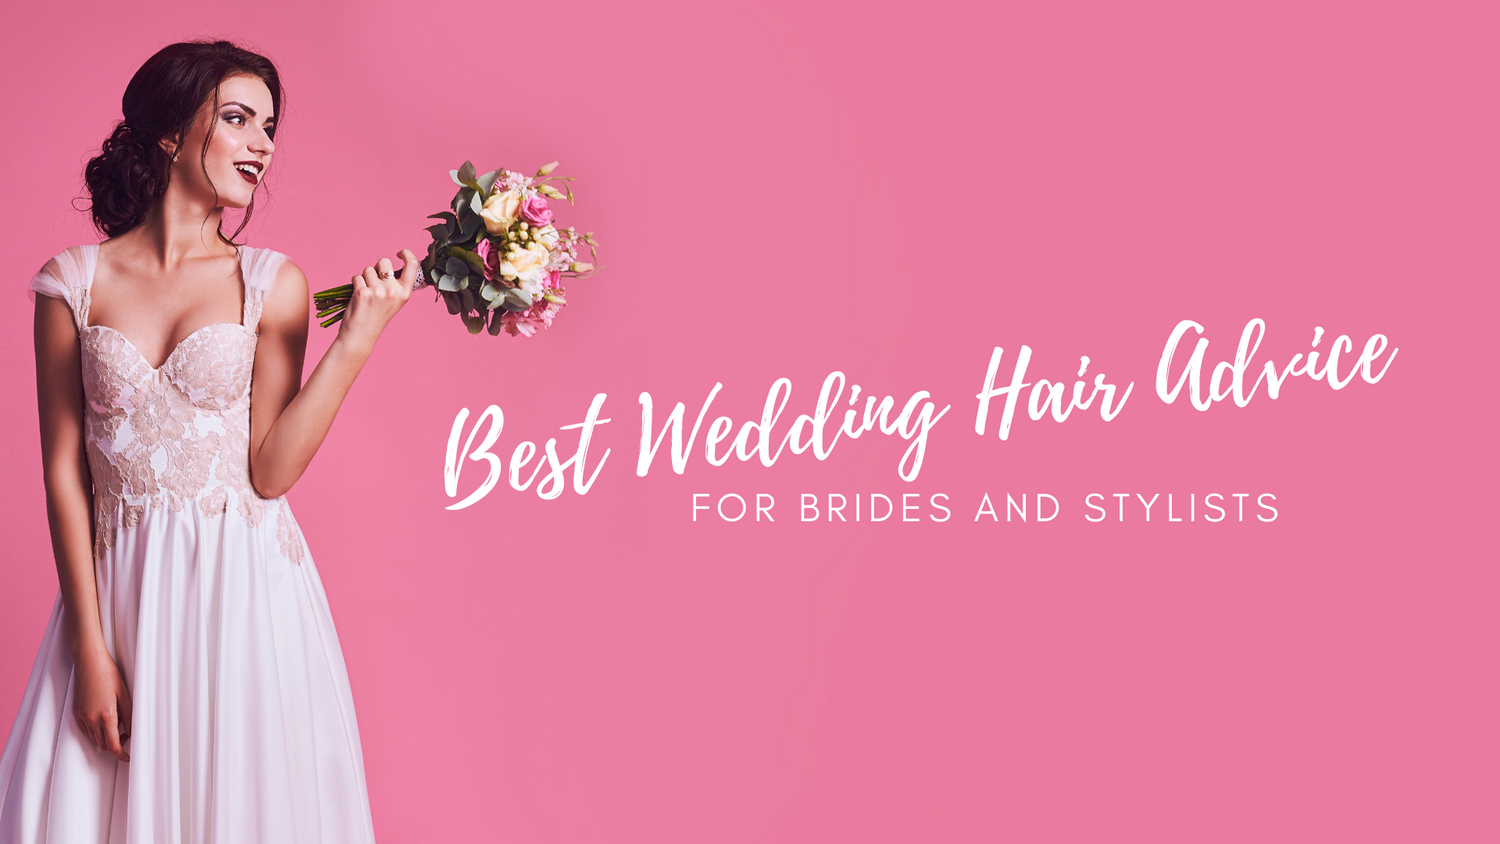 The Best Wedding Hair Advice for Brides and Stylists